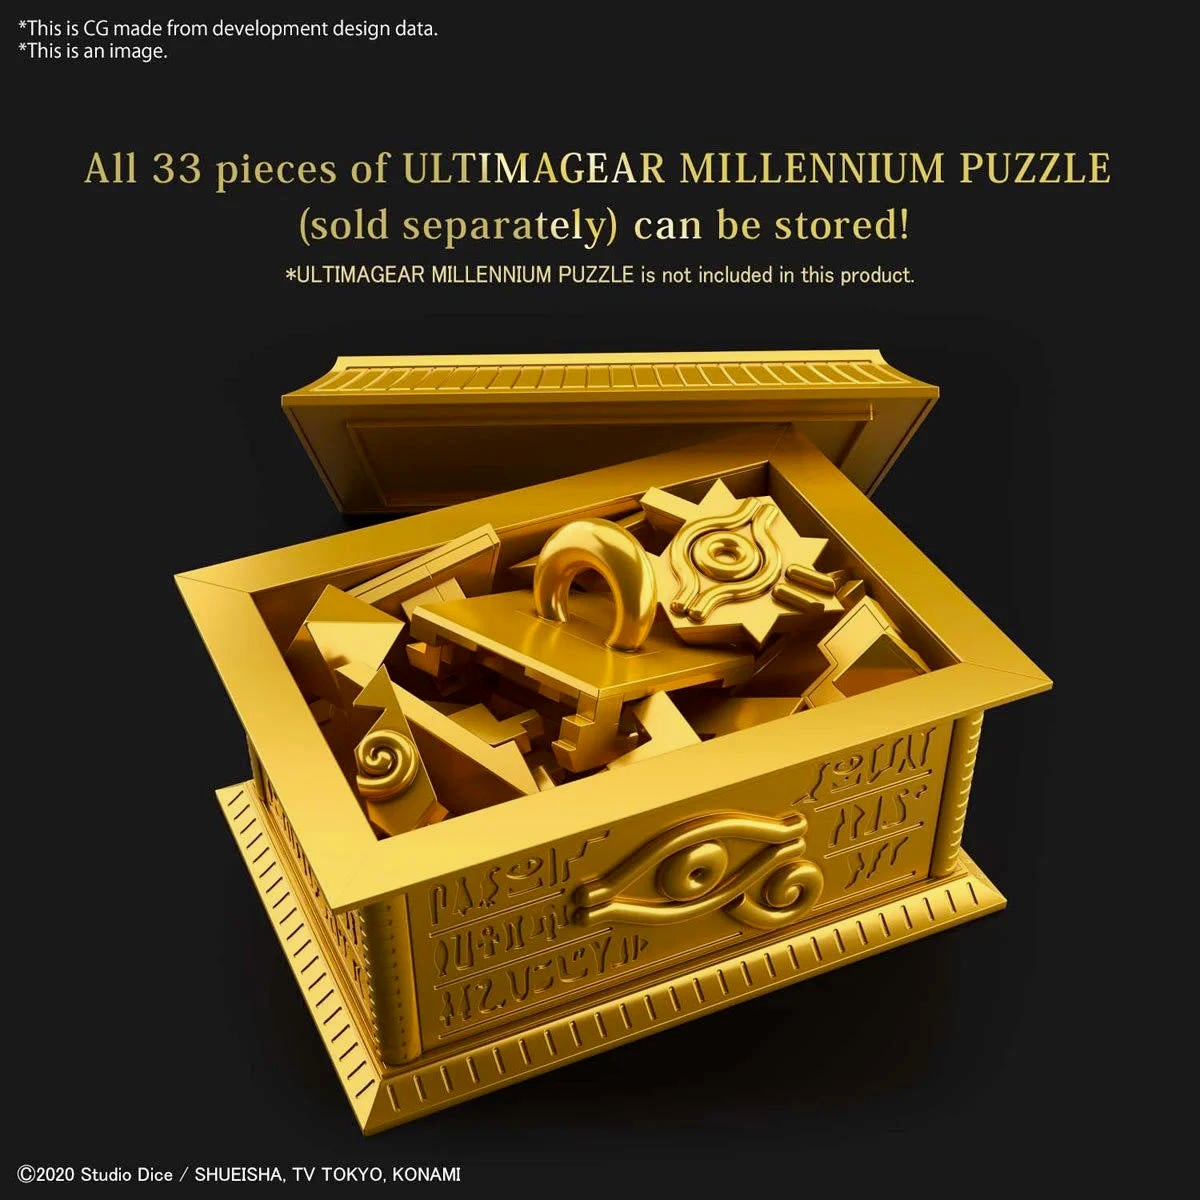 Yu-Gi-Oh Gold Sarcophagus For the Ultimagear Millennium Puzzle Kit